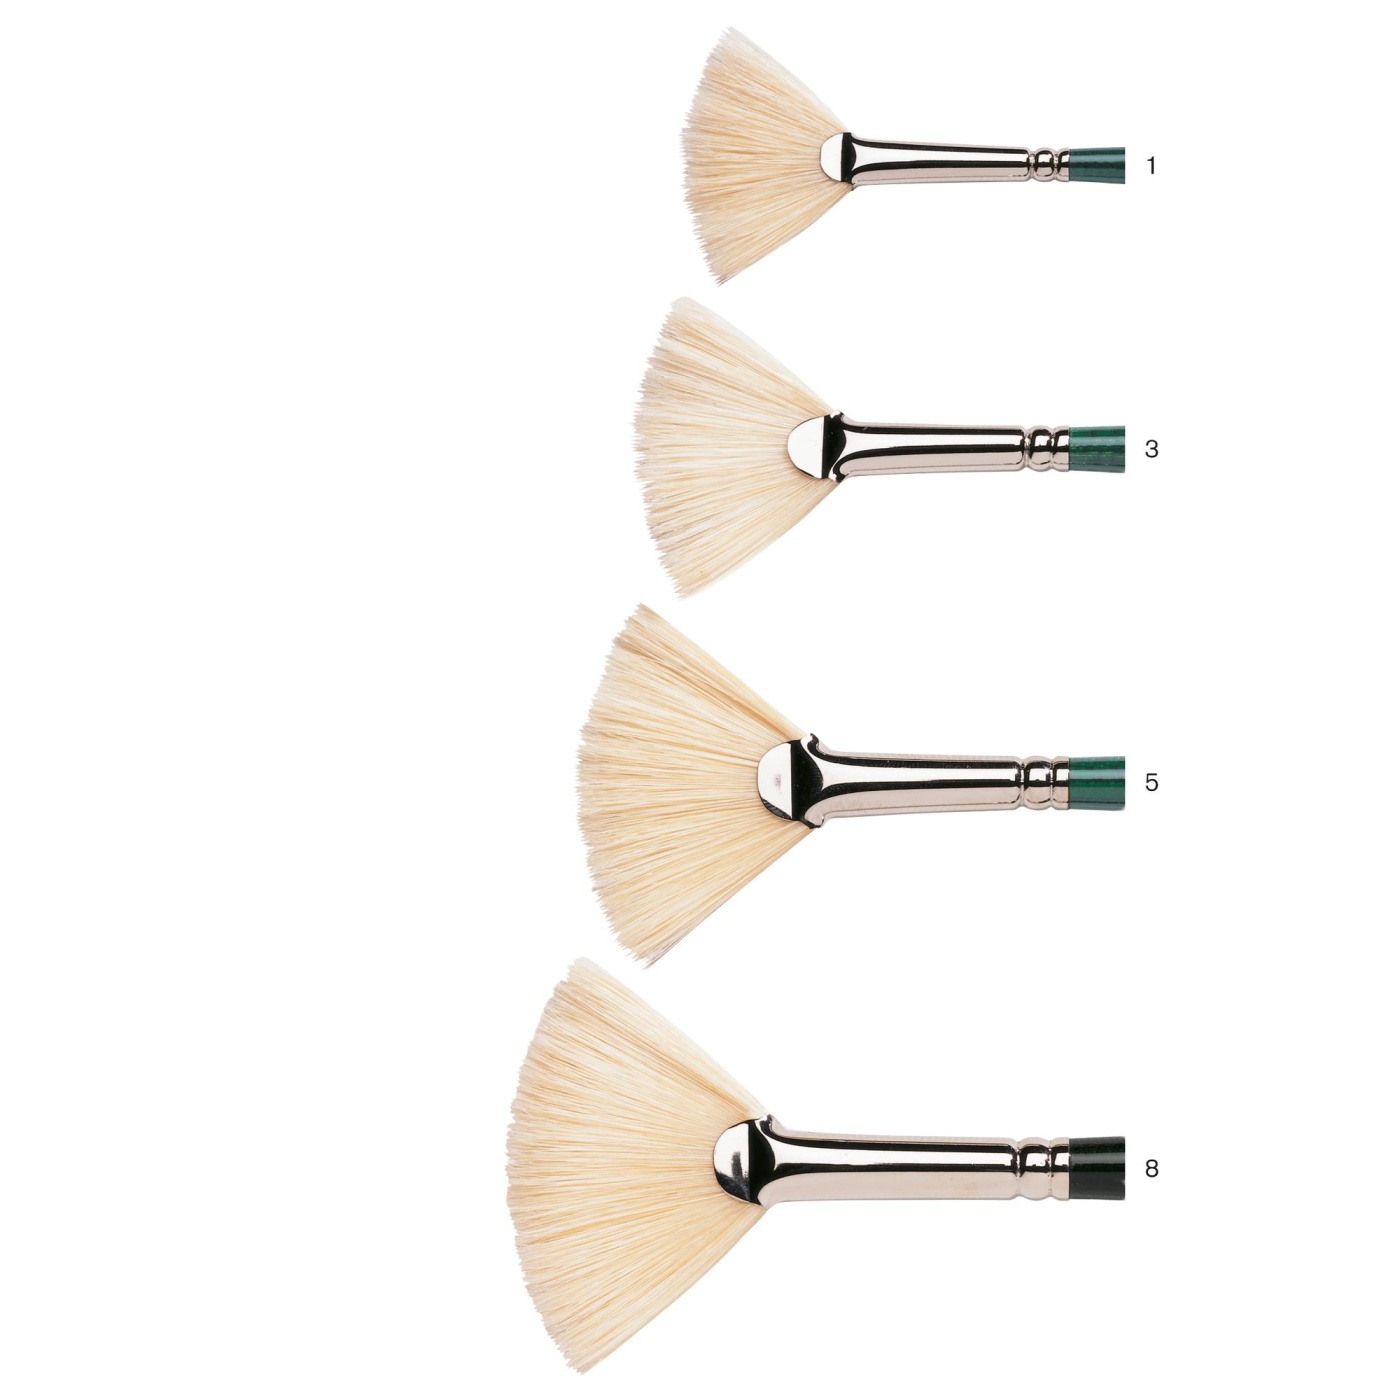 Winton Hog Brush Fan 8 in the group Art Supplies / Brushes / Natural Hair Brushes at Pen Store (107664)